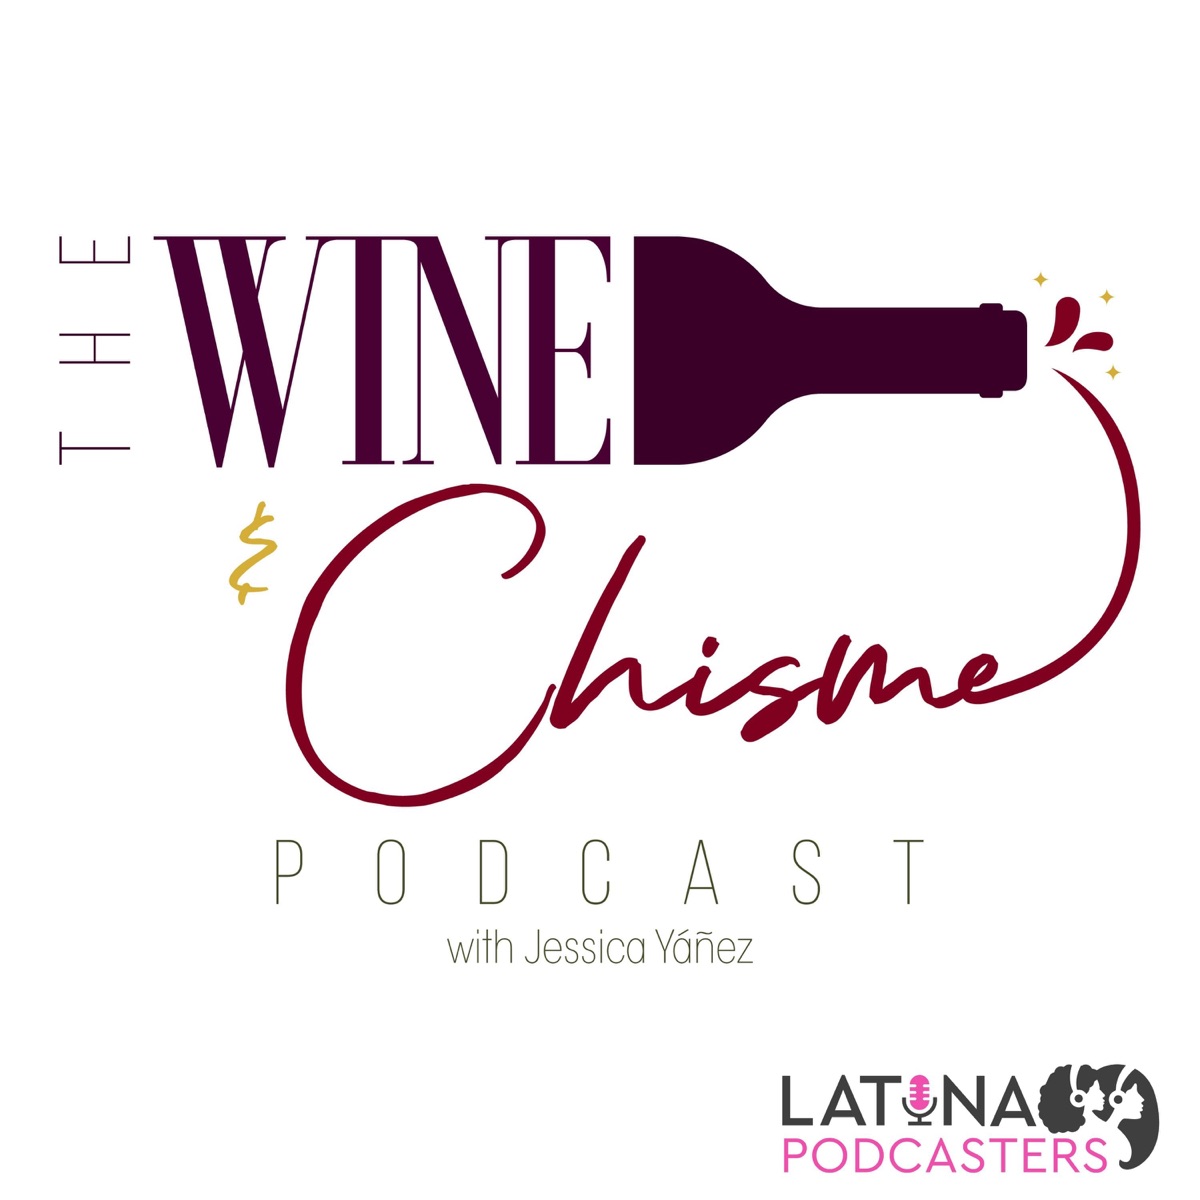 The Wine and Chisme Podcast – Podcast